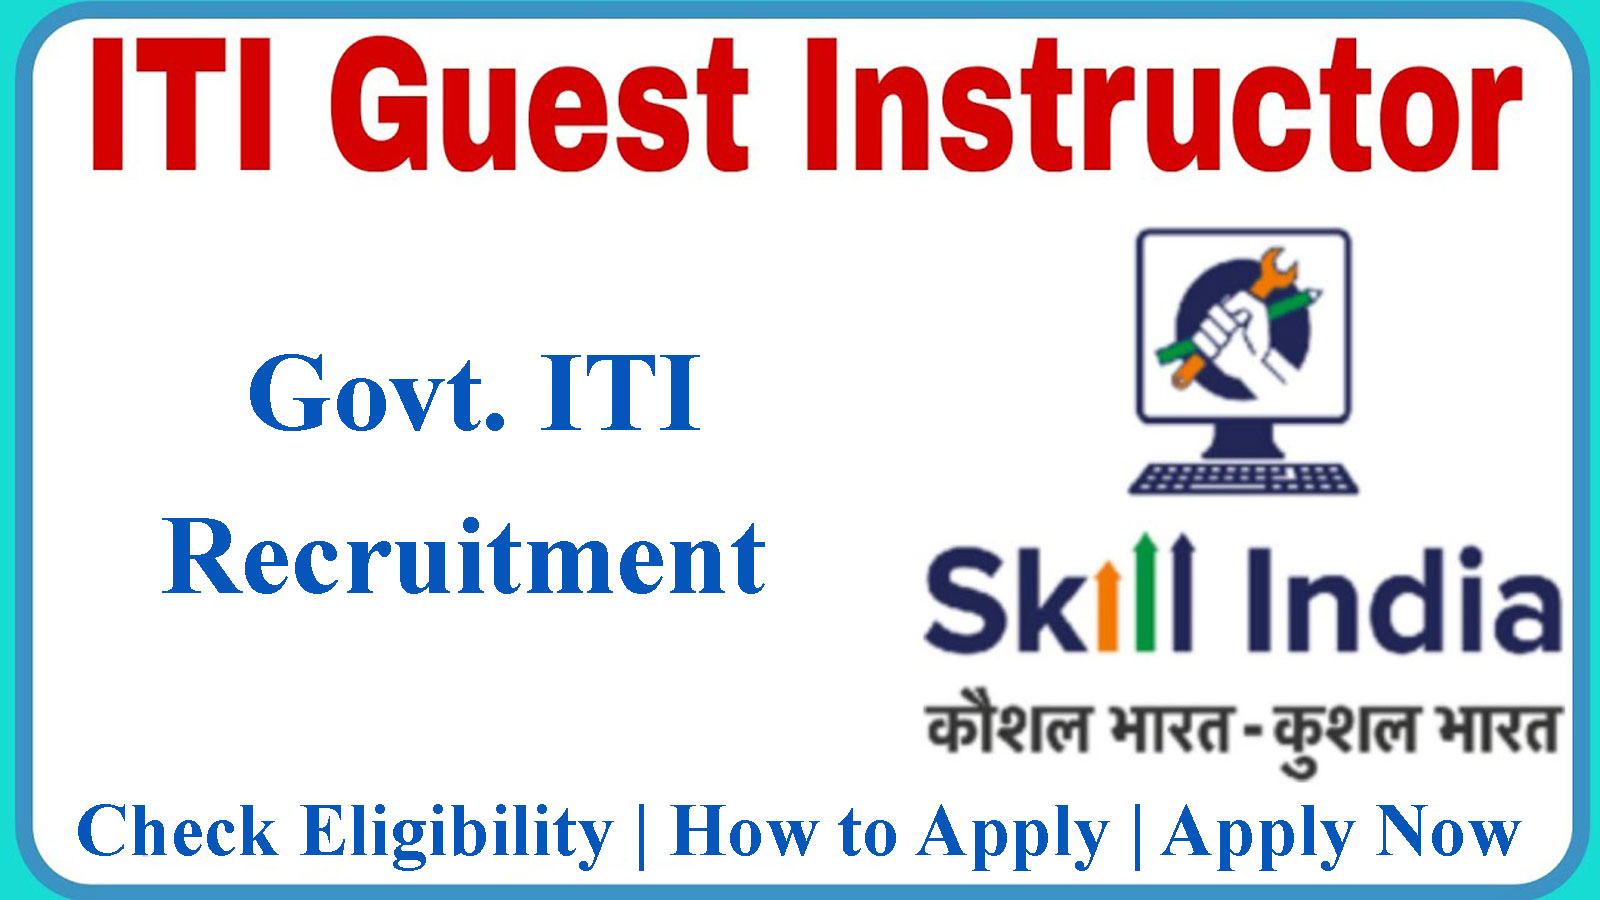 Govt. ITI Recruitment for Guest Instructor